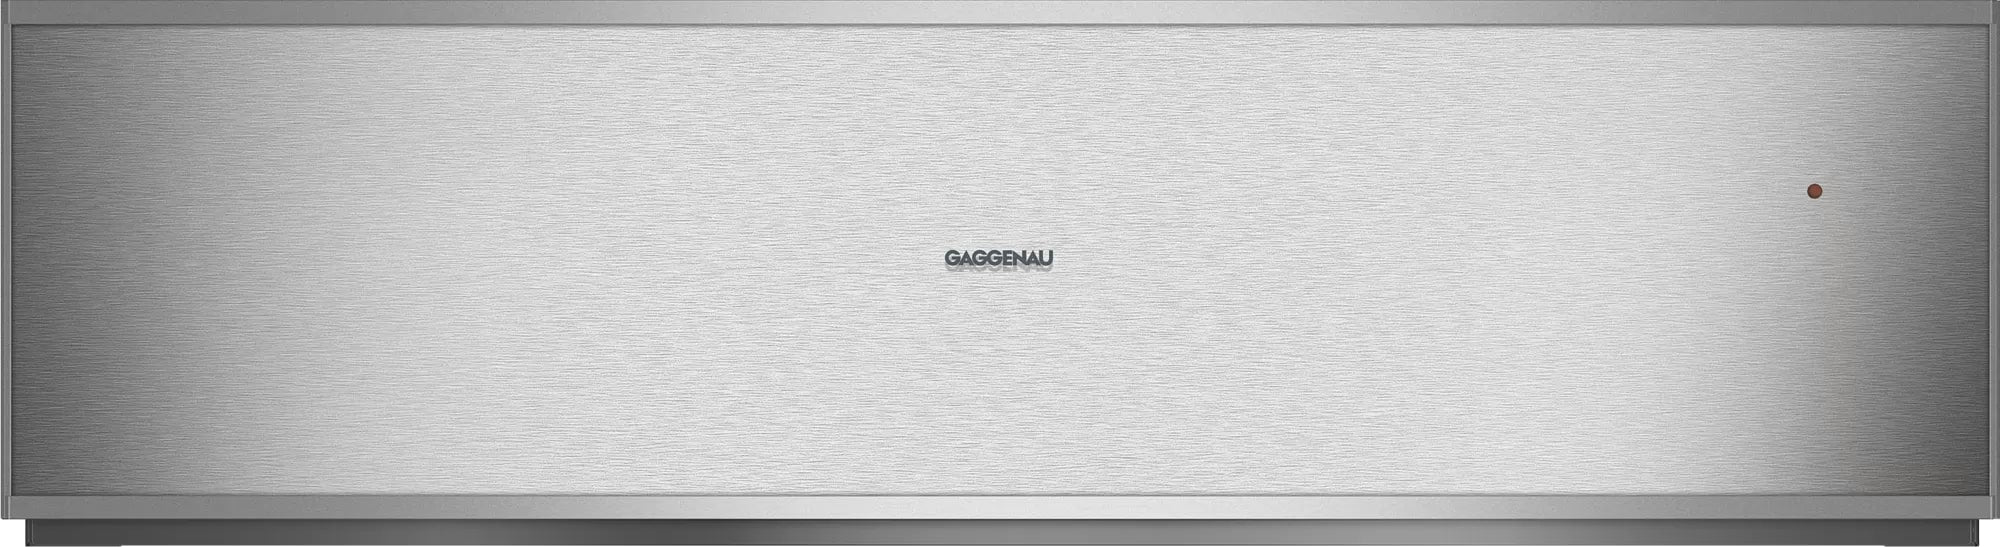 Gaggenau - 1.3 cu. ft Warming Drawer Wall Oven in Stainless - WS482710